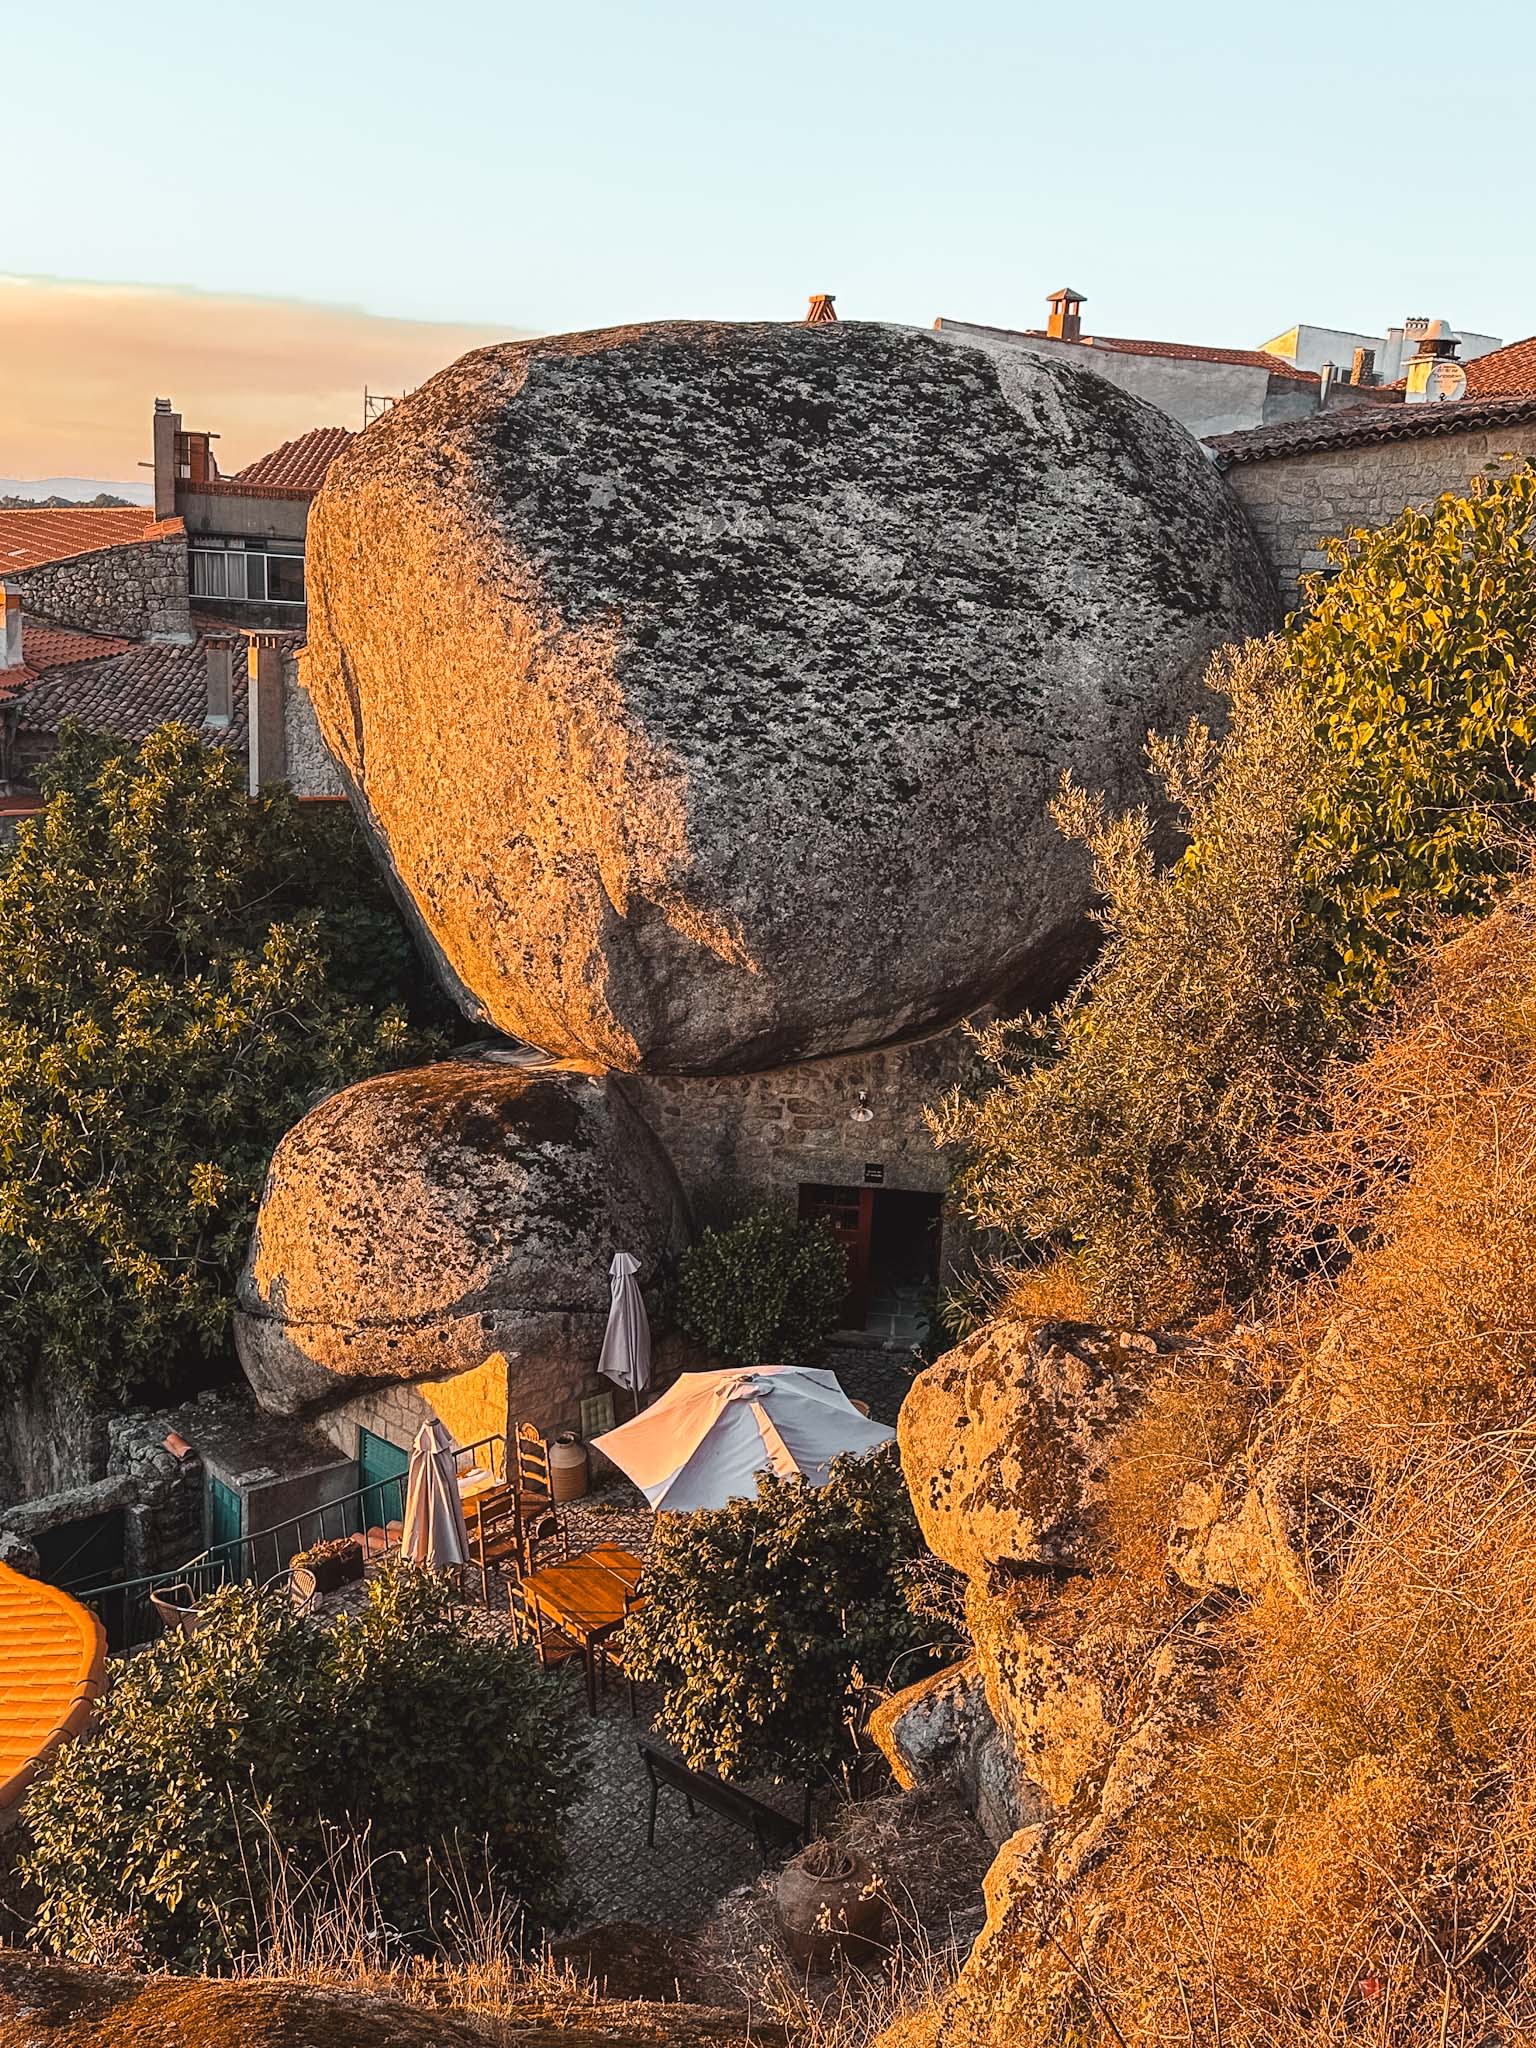 Best things to do in Monsanto, Portugal - look at the boulder houses in Monsanto